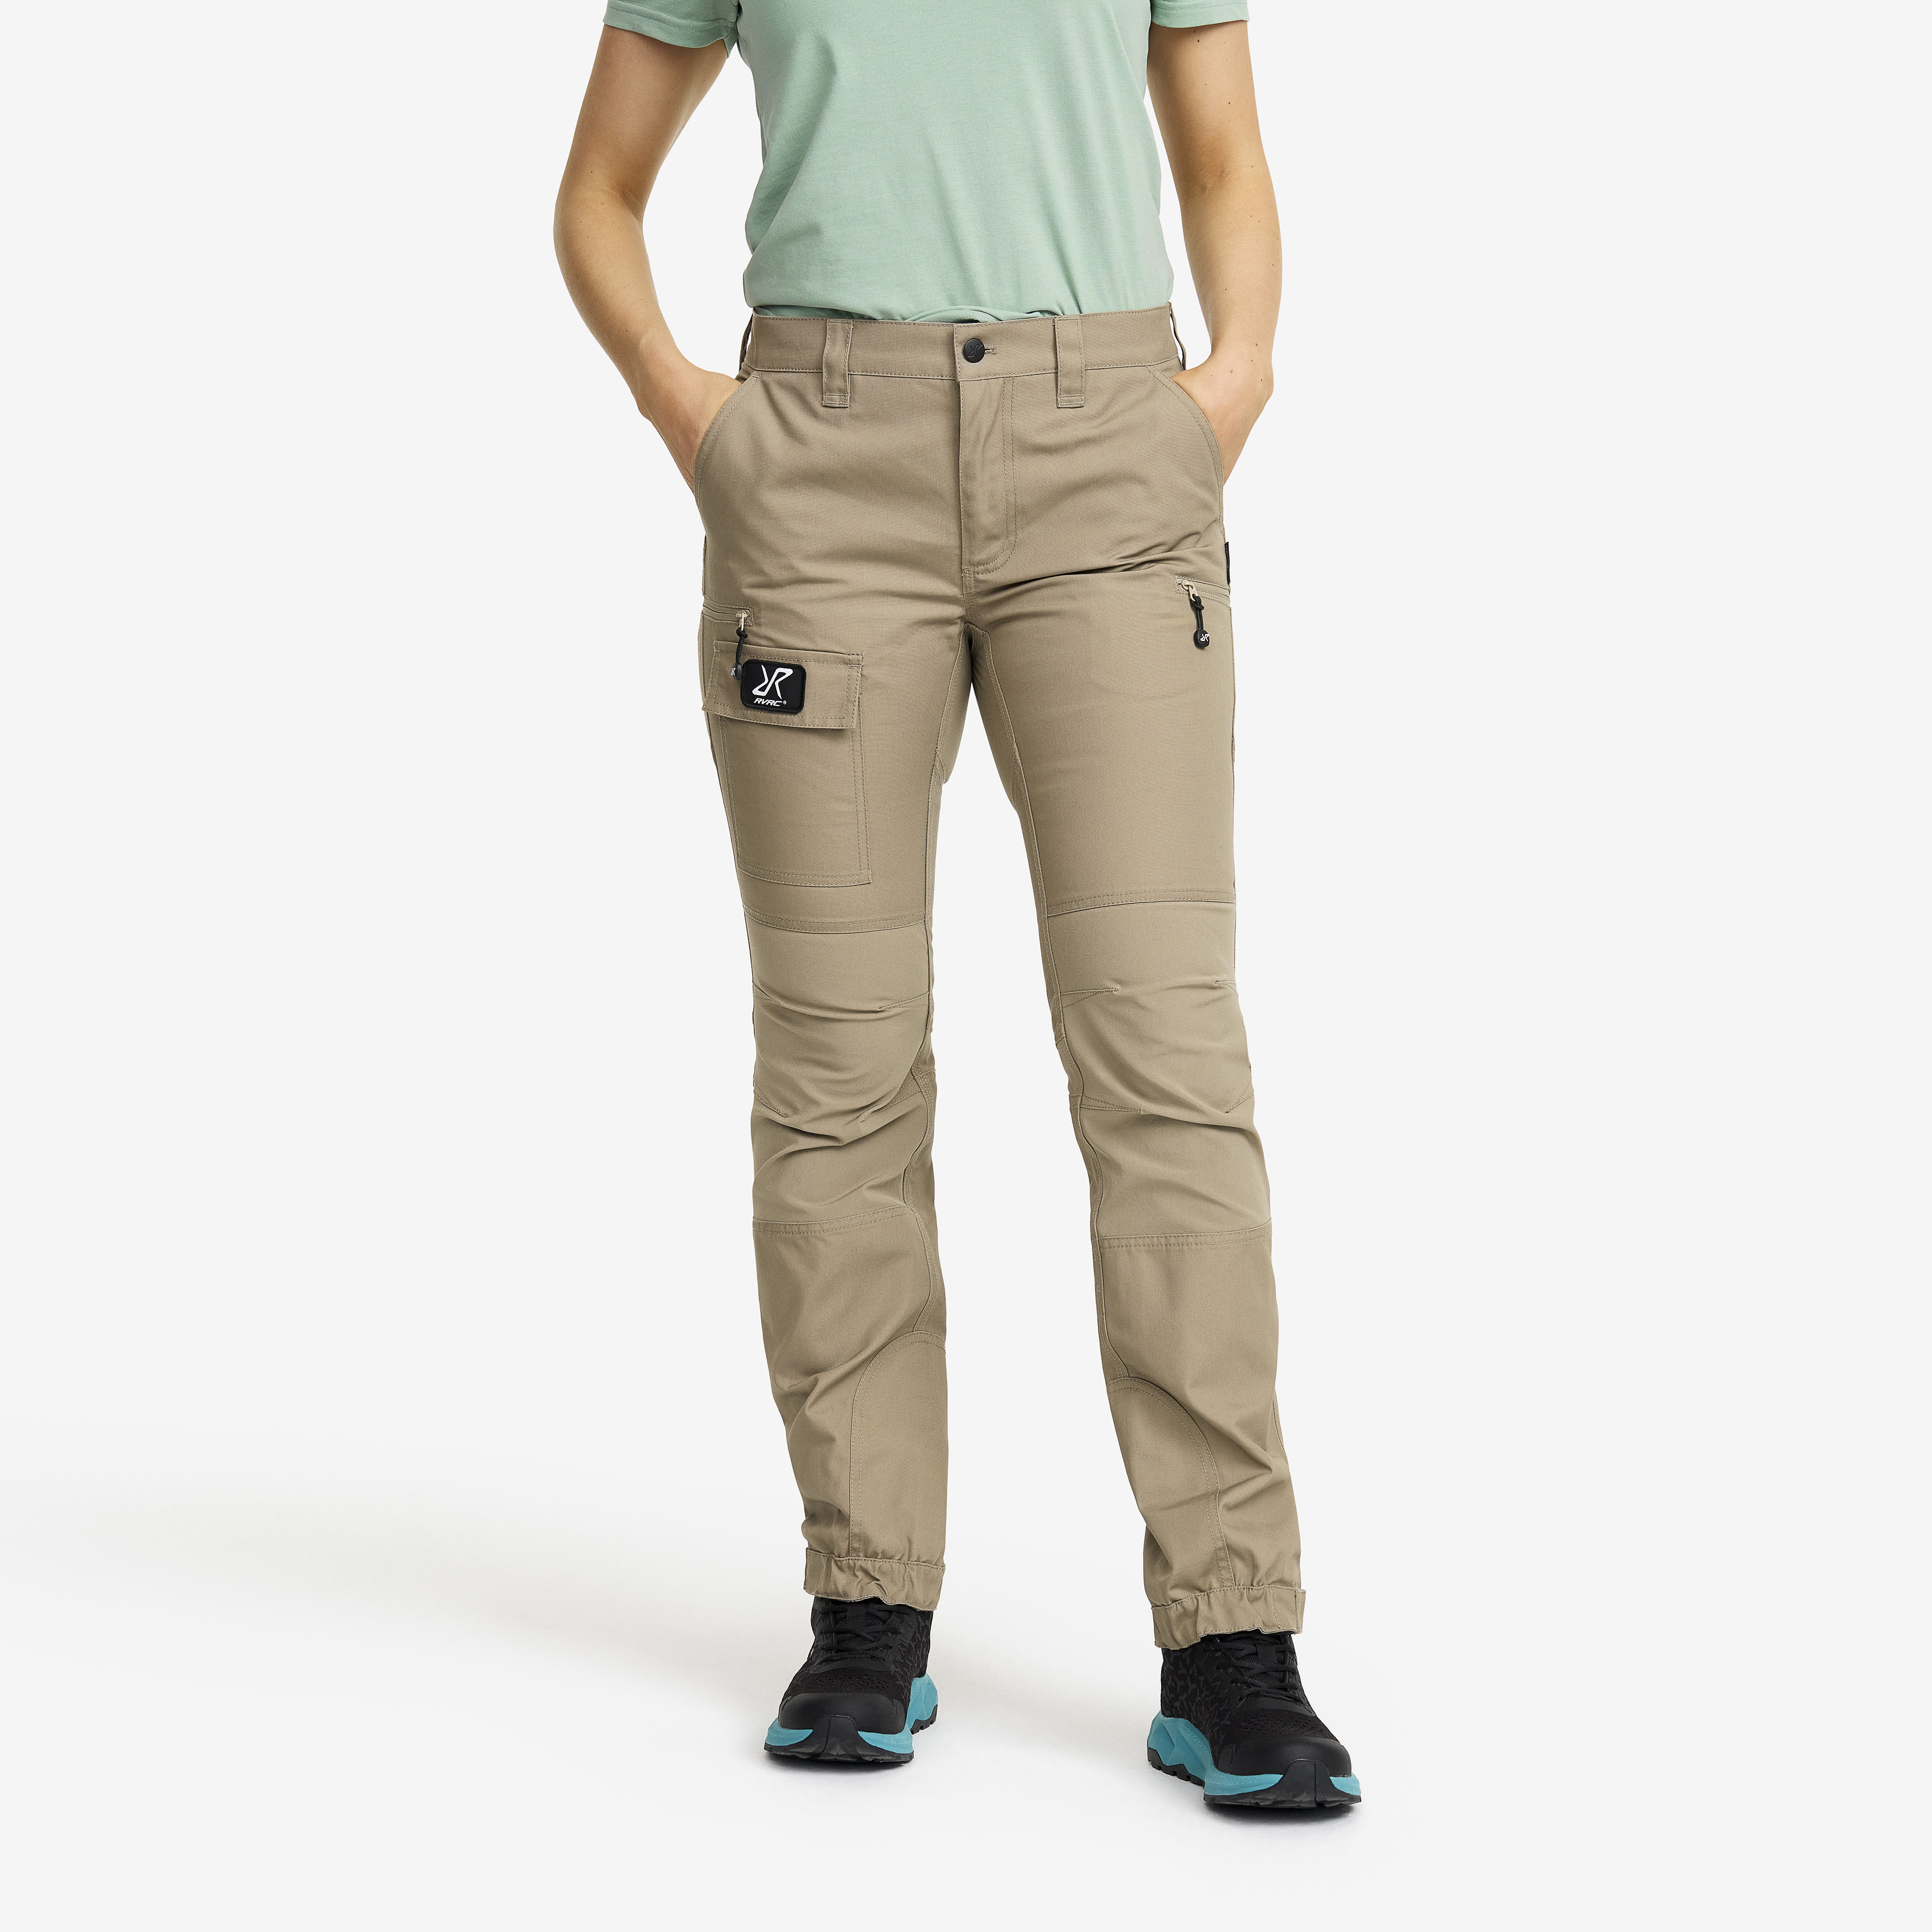 Nordwand Trousers Brindle Women